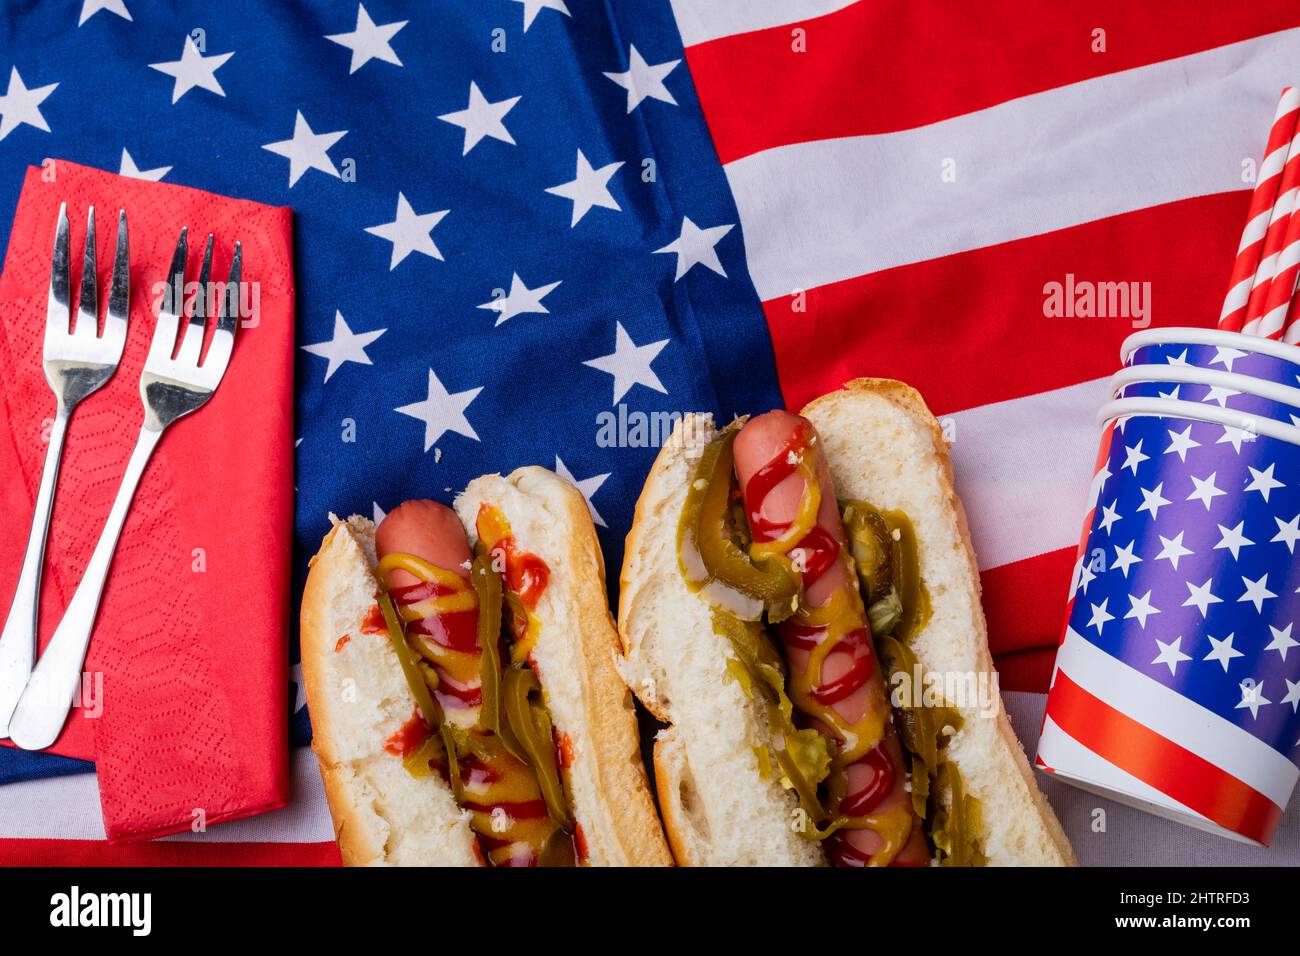 Overhead view of hot dogs with jalapeno served on american flag with fork and disposable cups Stock Photo